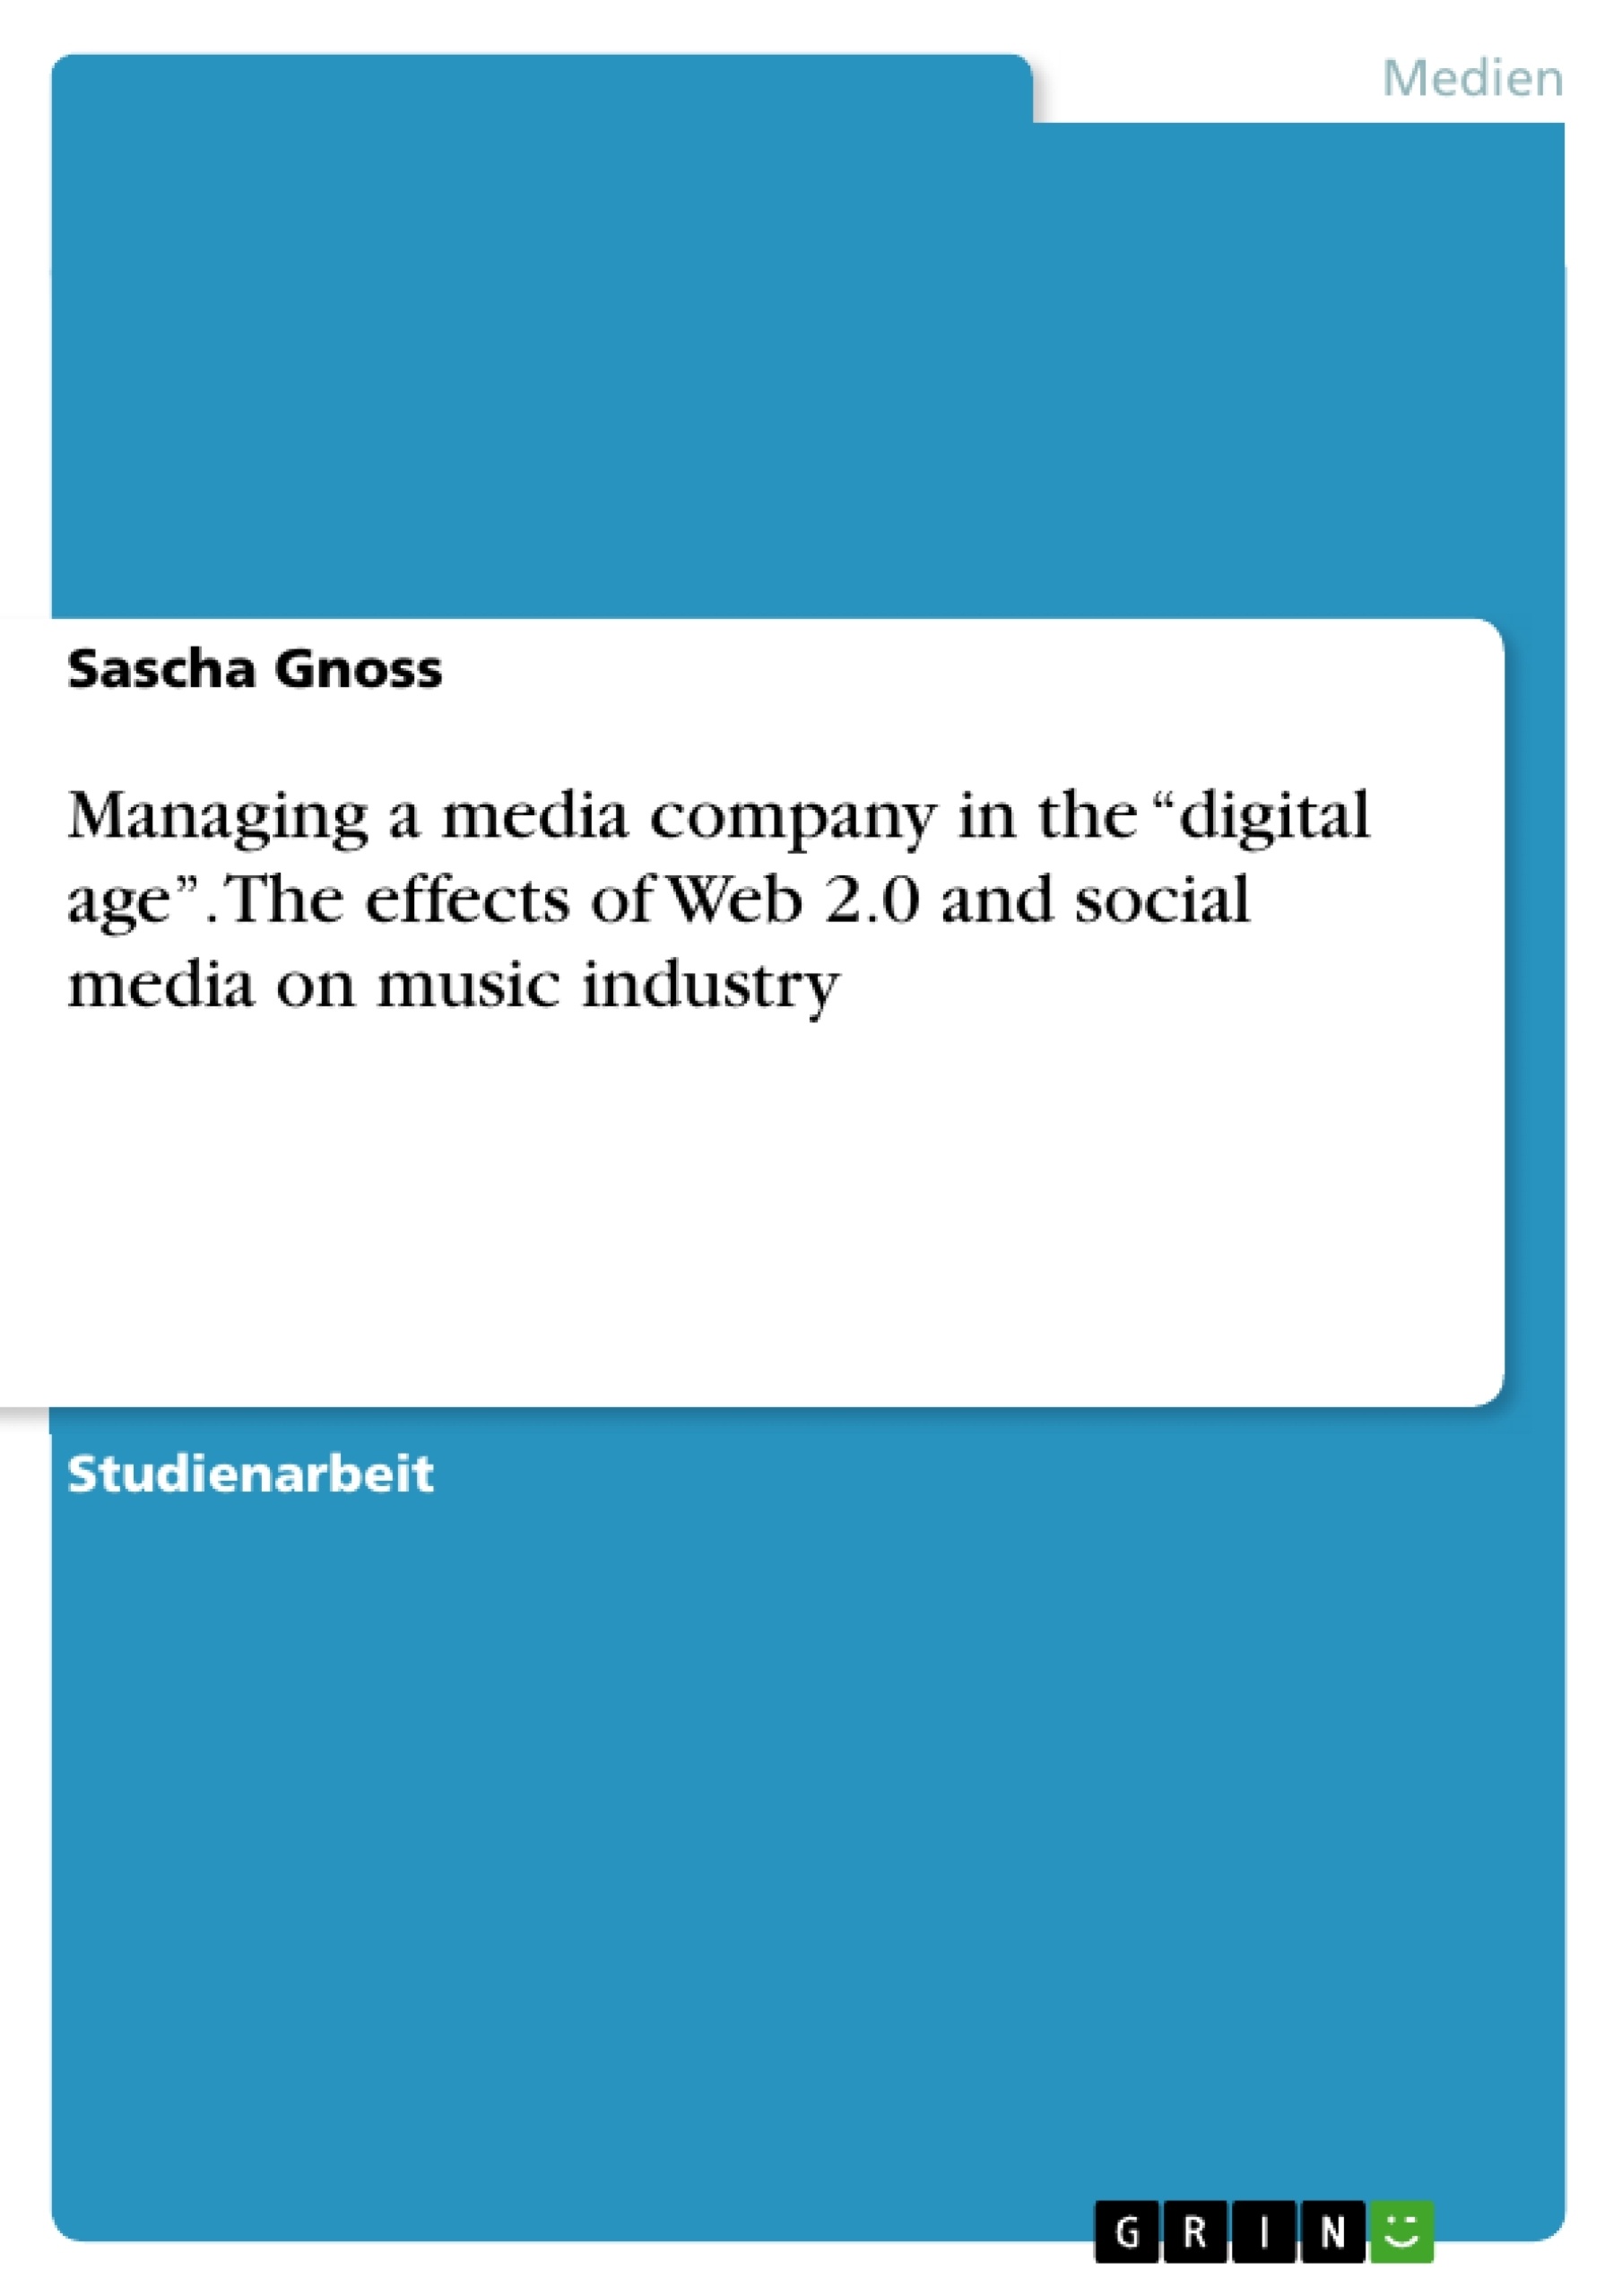 Título: Managing a media company in the “digital age”. The effects of Web 2.0 and social media on music industry